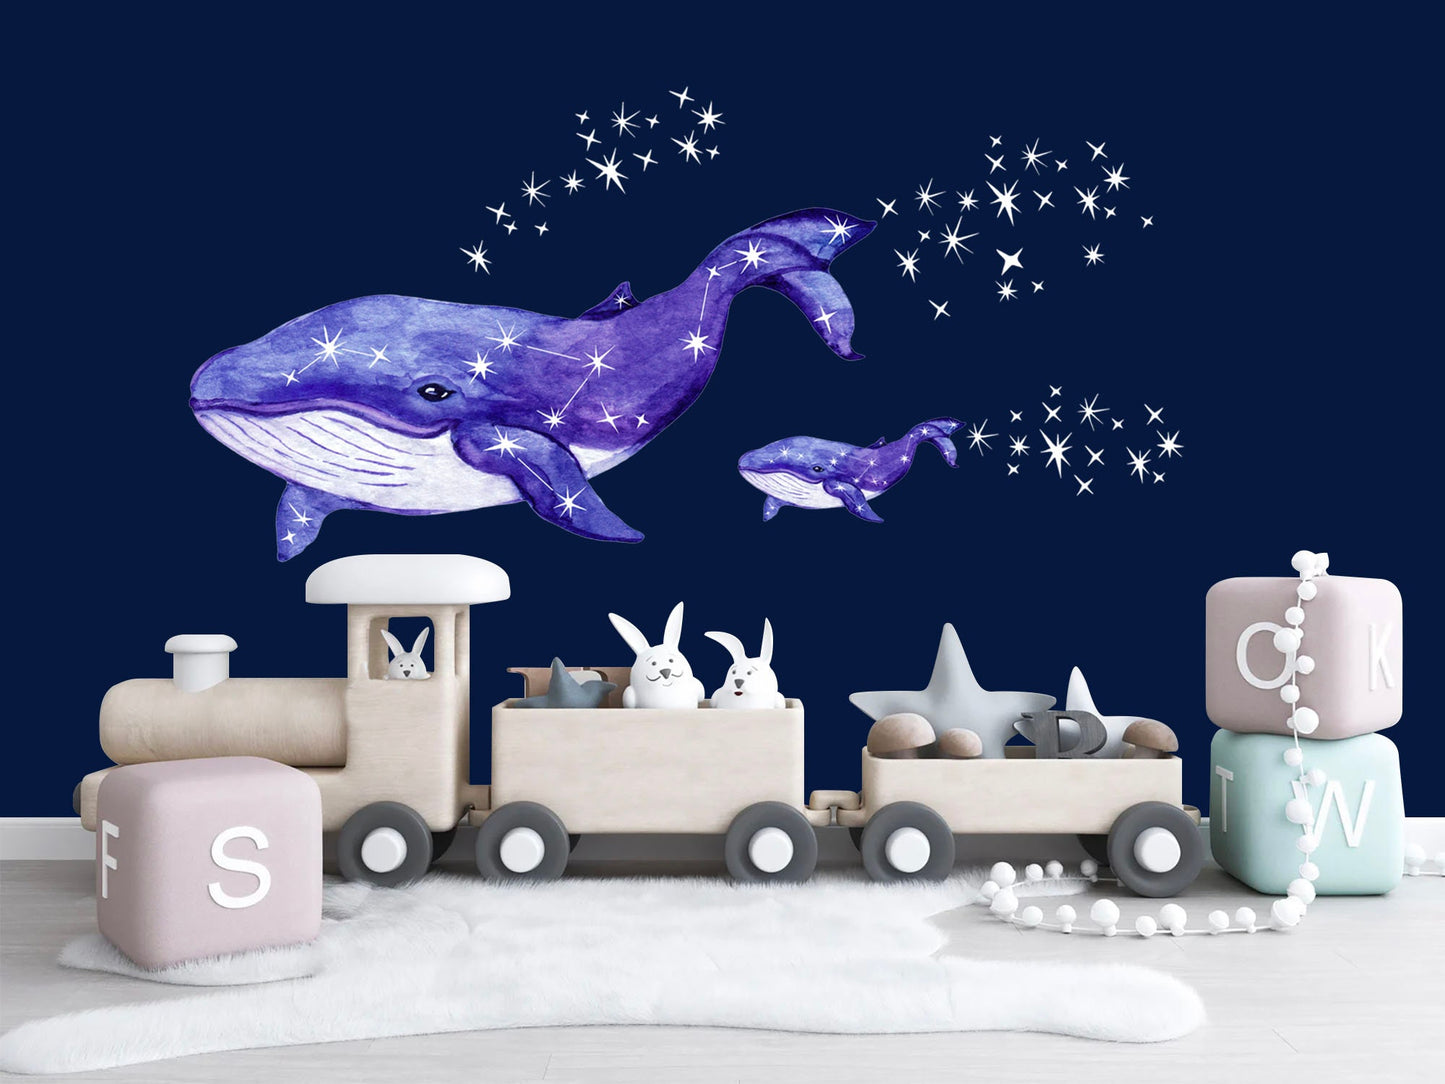 Whale Mommy and Baby Flying with Stars Painting Wall Decal - Removable Peel and Stick - BR219